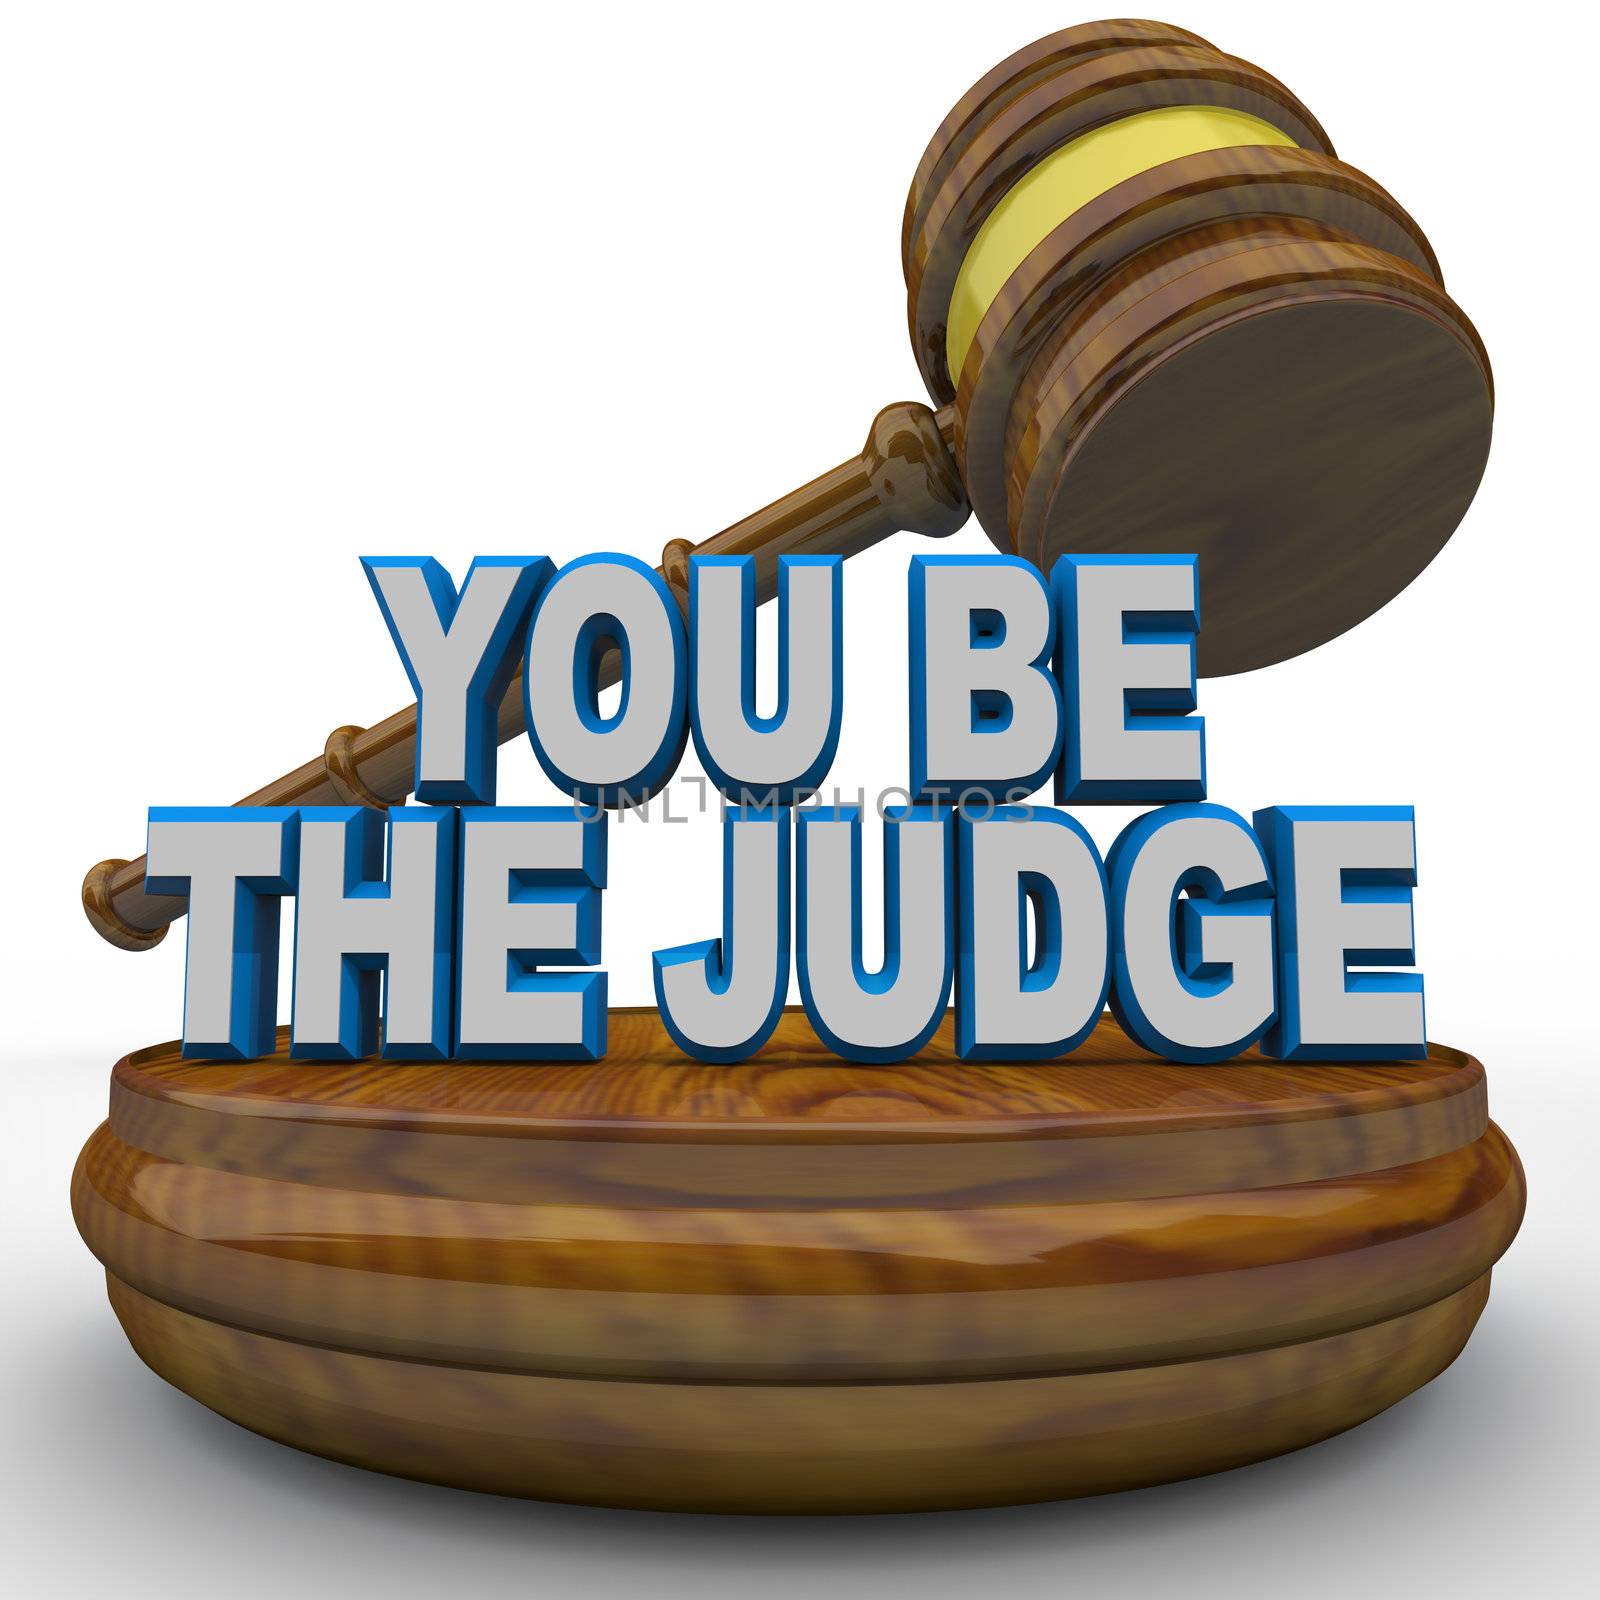 A gavel comes down on the words You Be the Judge, symbolizing the opportunity of making choices between options